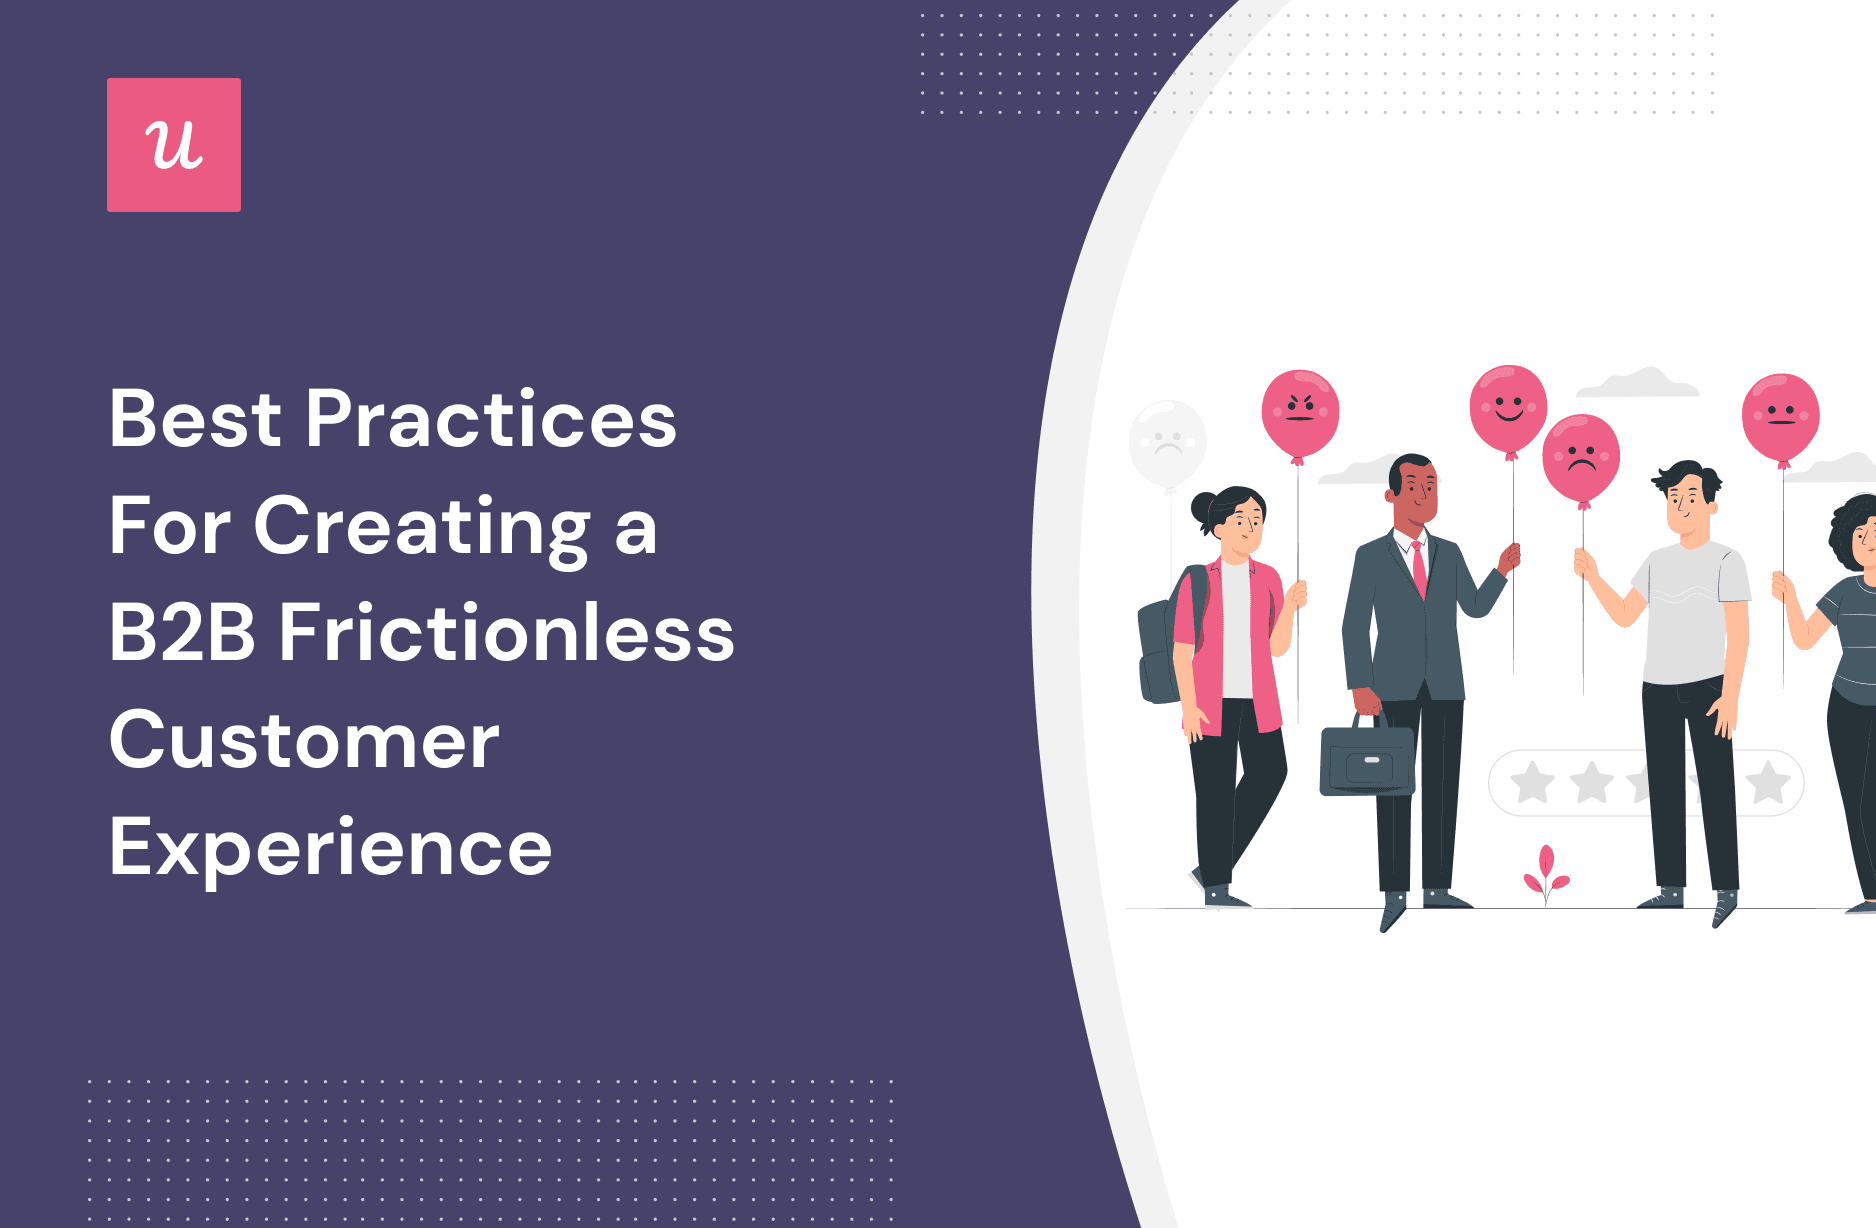 Best Practices For Creating a B2B Frictionless Customer Experience cover